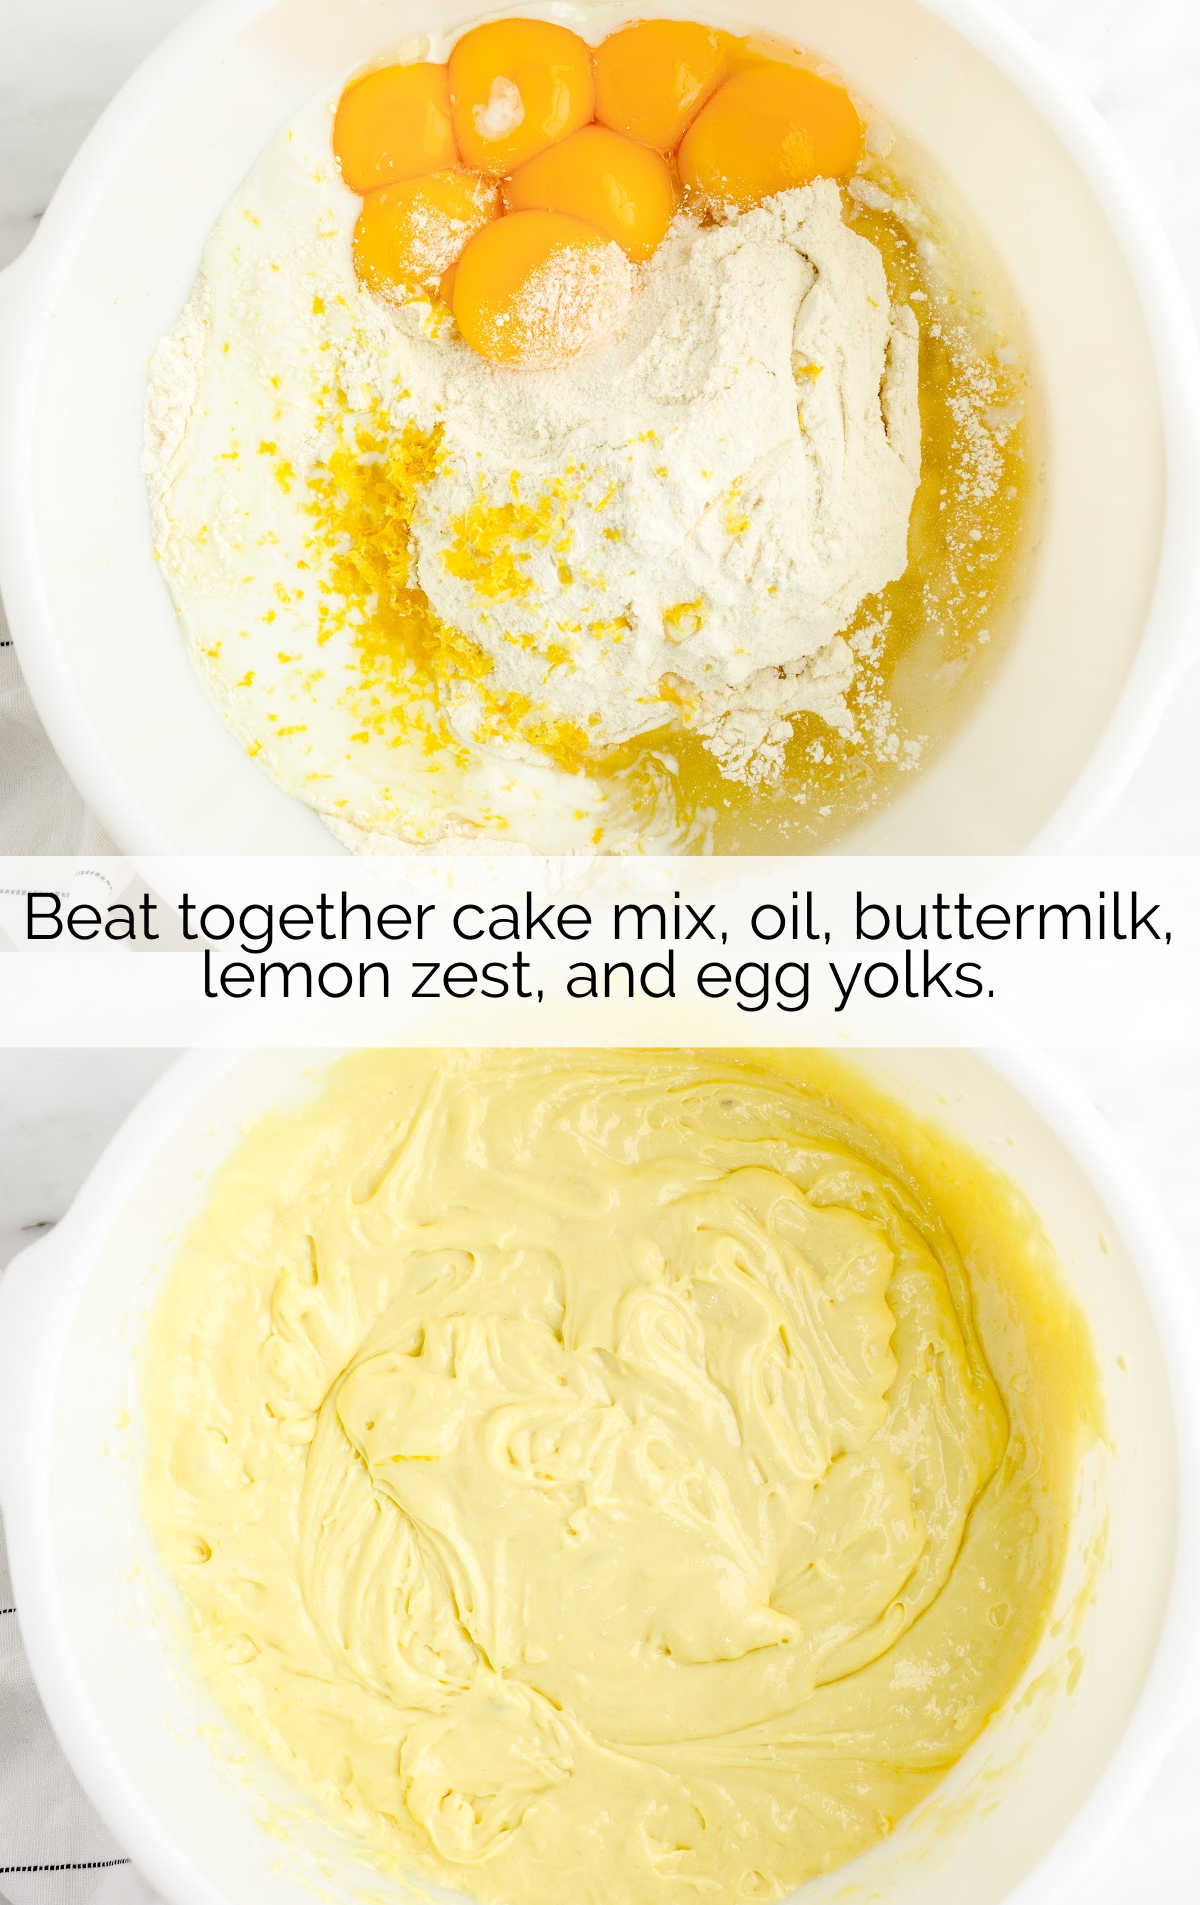 cake mix, oil, buttermilk, lemon zest and egg yolk mixed together in a bowl